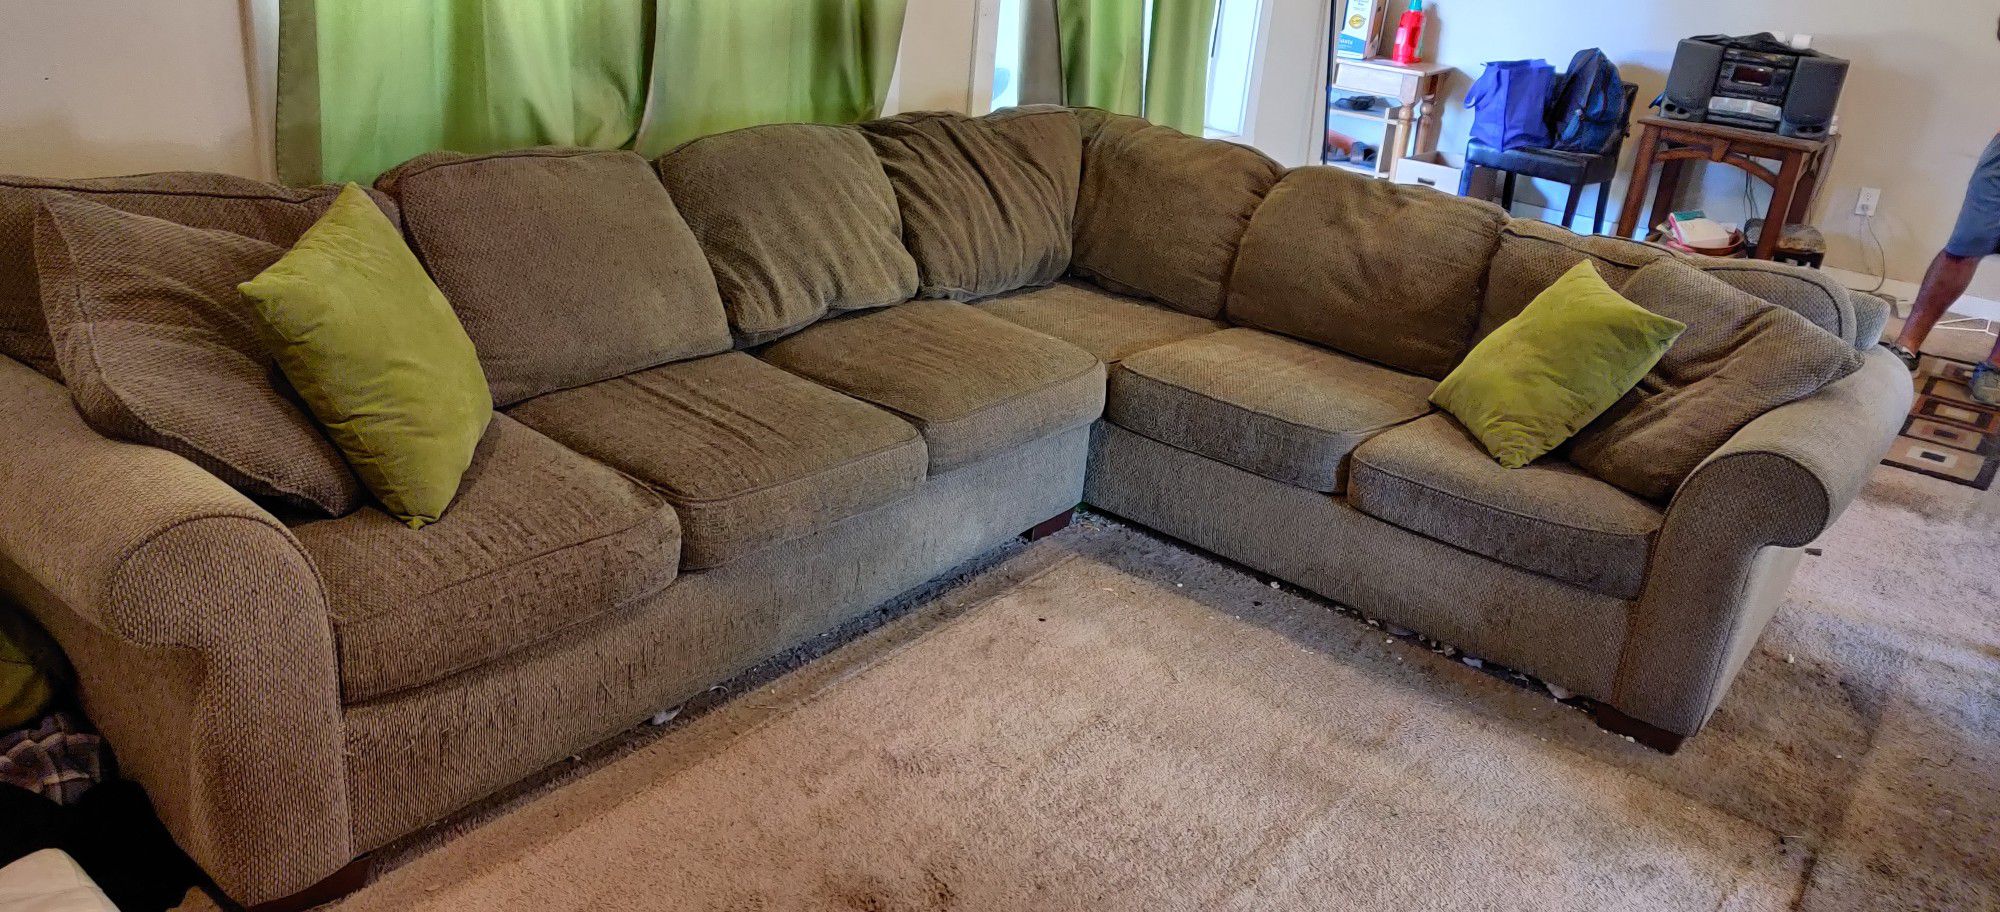 FREE large sectional couch and chair